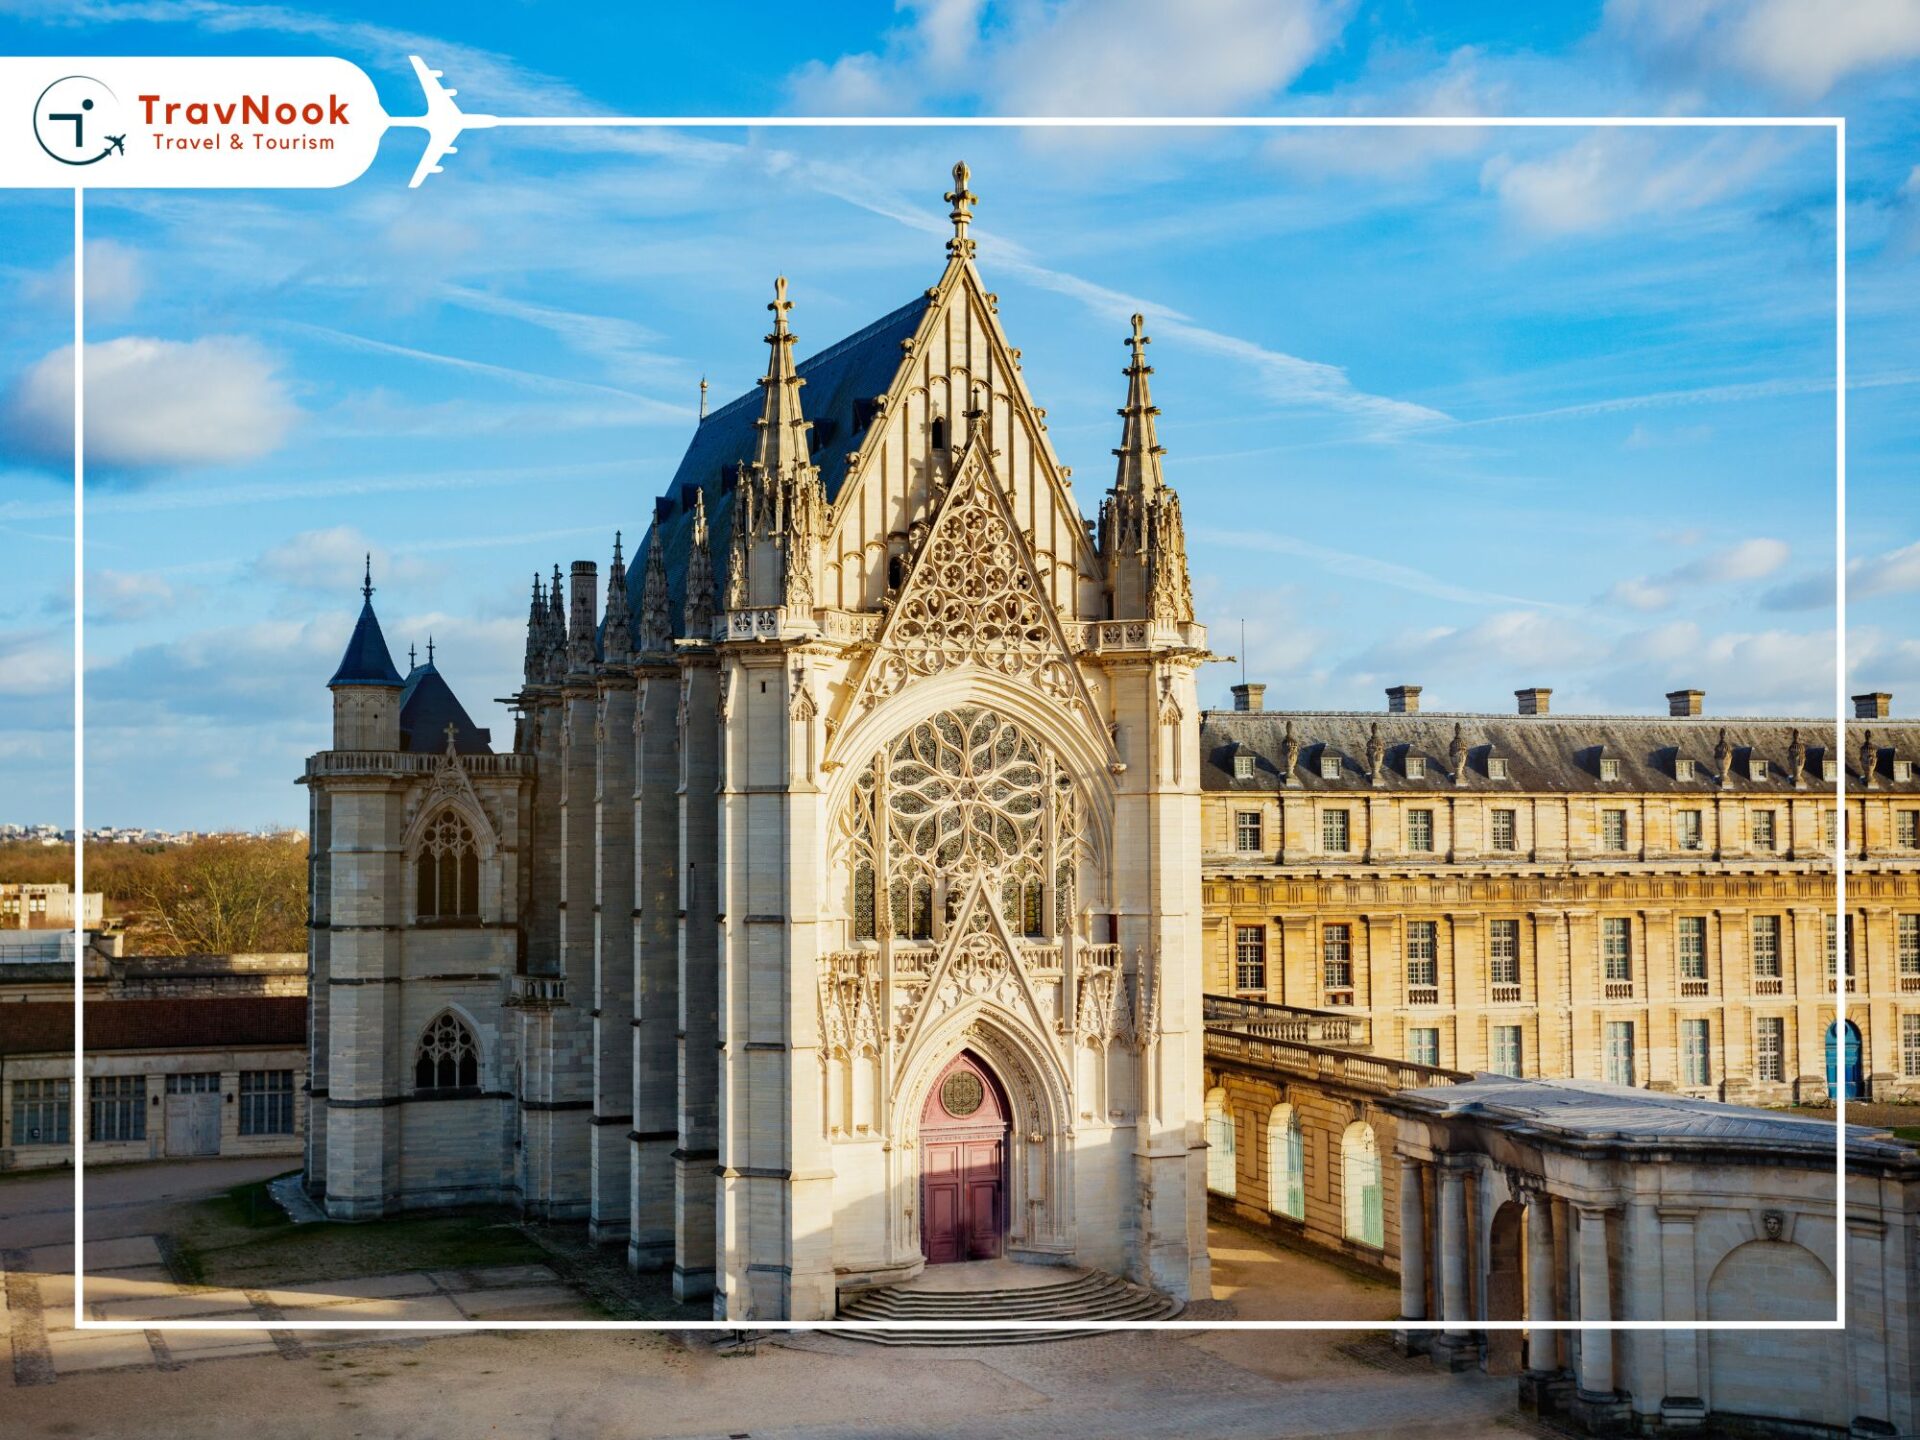 Famous Landmarks in France to Visit From UAE - The Sainte Chapelle, Paris